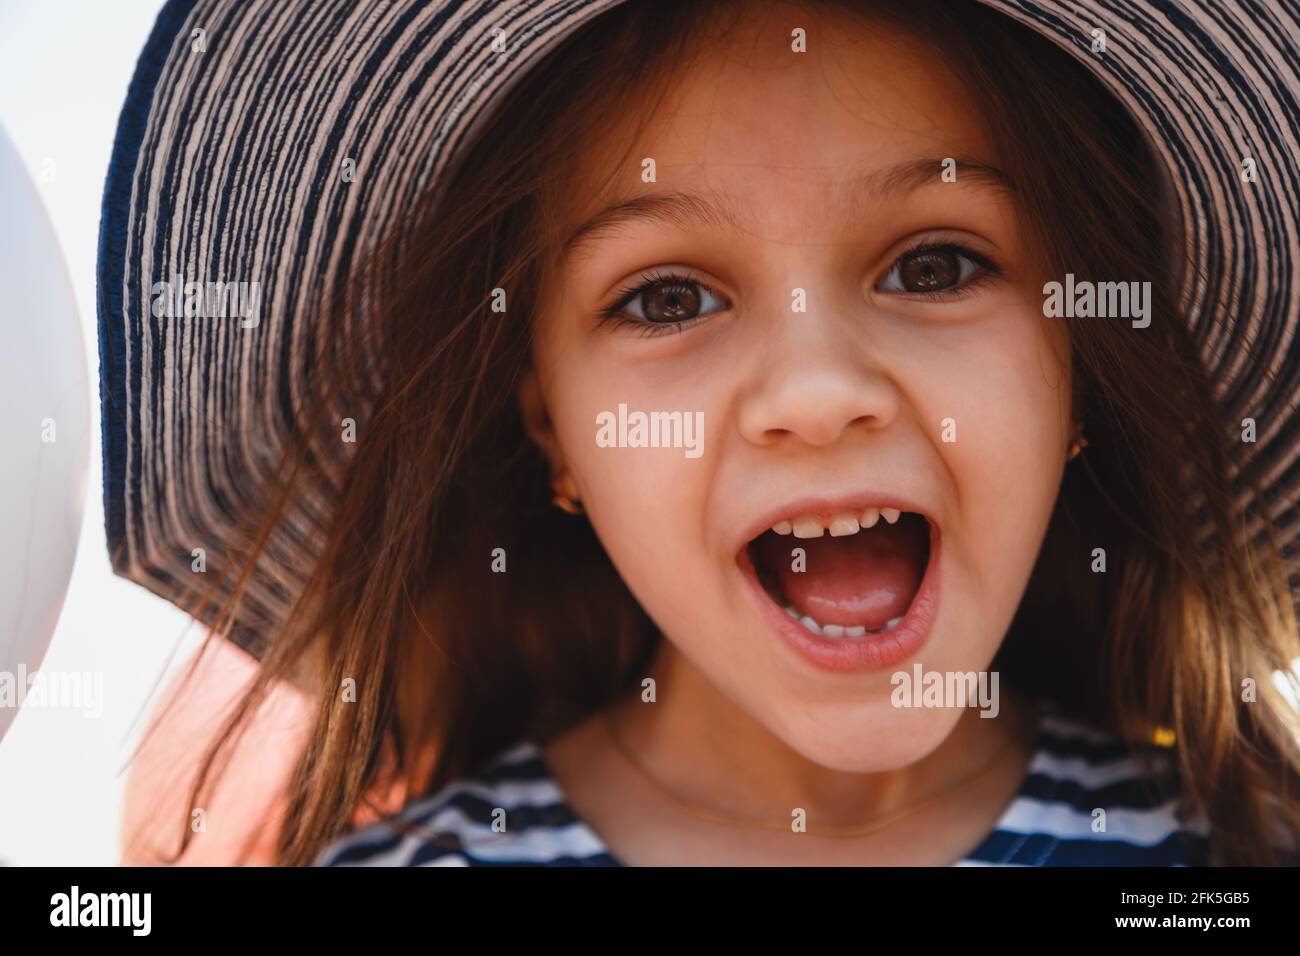 Close up fun portrait of cute laughing little girl in striped sunhat and shirt looking at camera. Selective focus Stock Photo